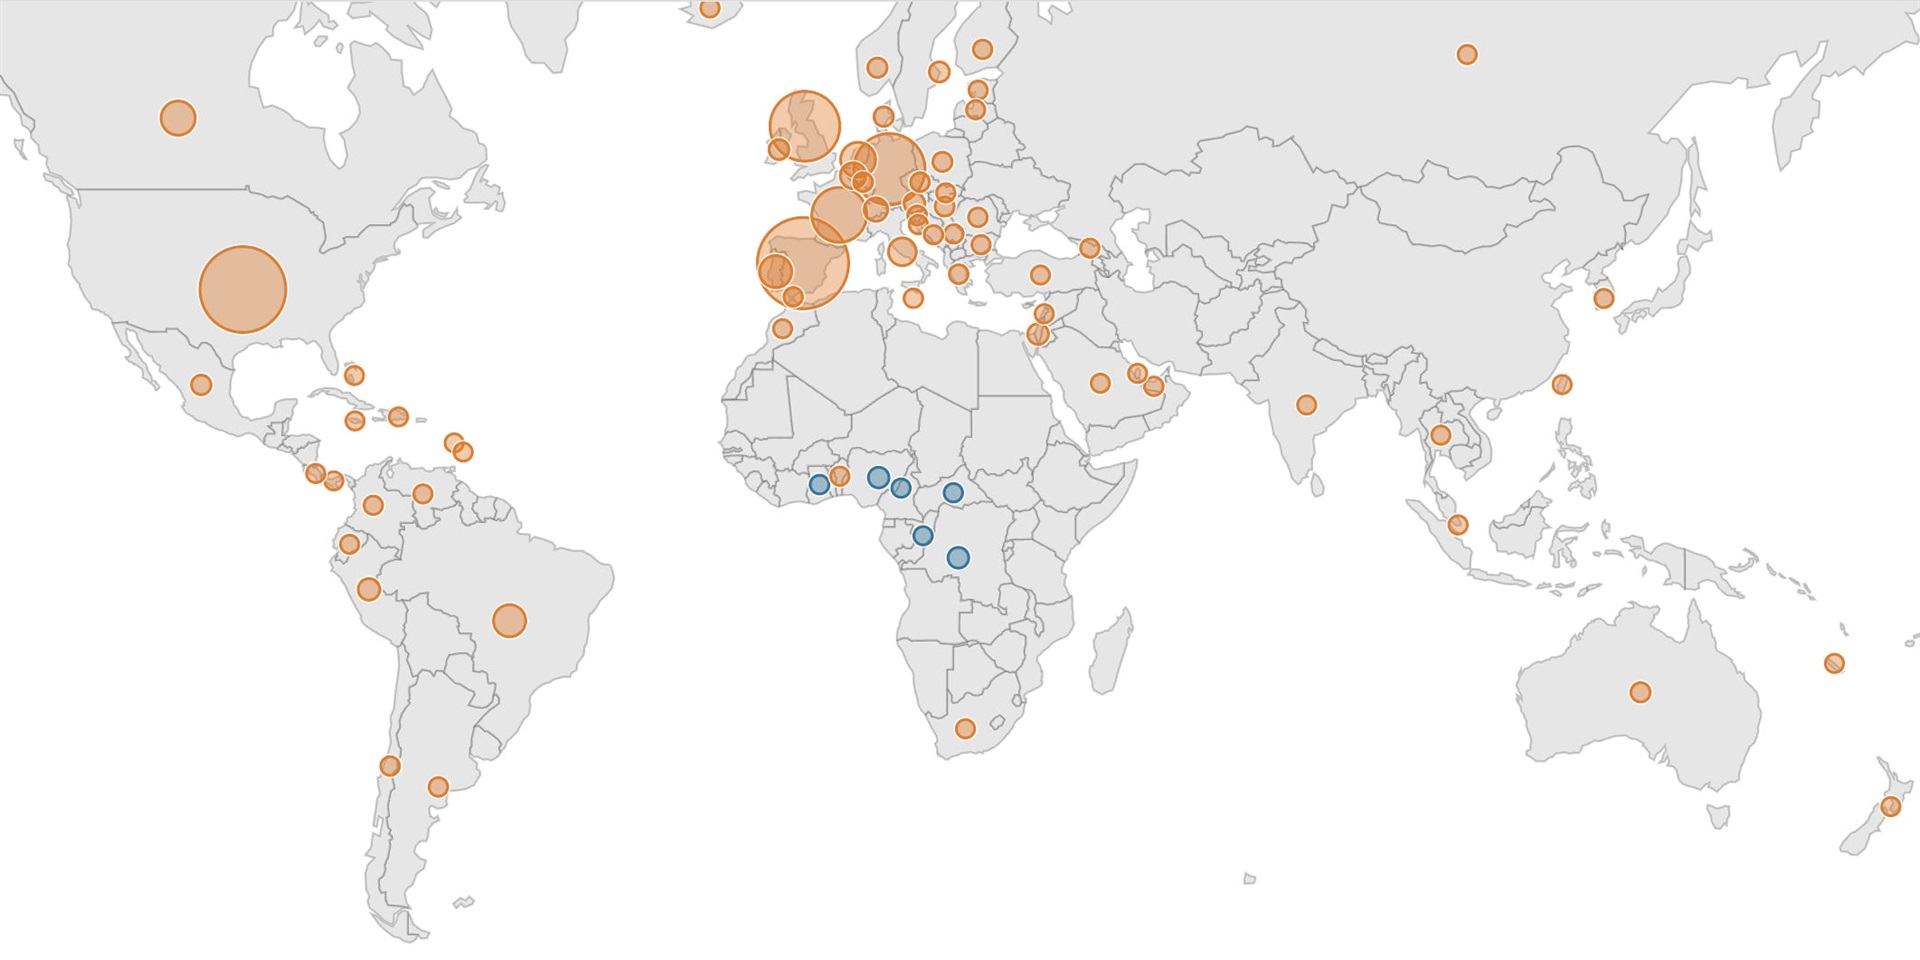 This map shows reported cases of monkeypox in teh 2022 outbreak. Blue circles: countries that have historically reported monkeypox, orange circles: countries that have not historically reported monkeypox. CDC